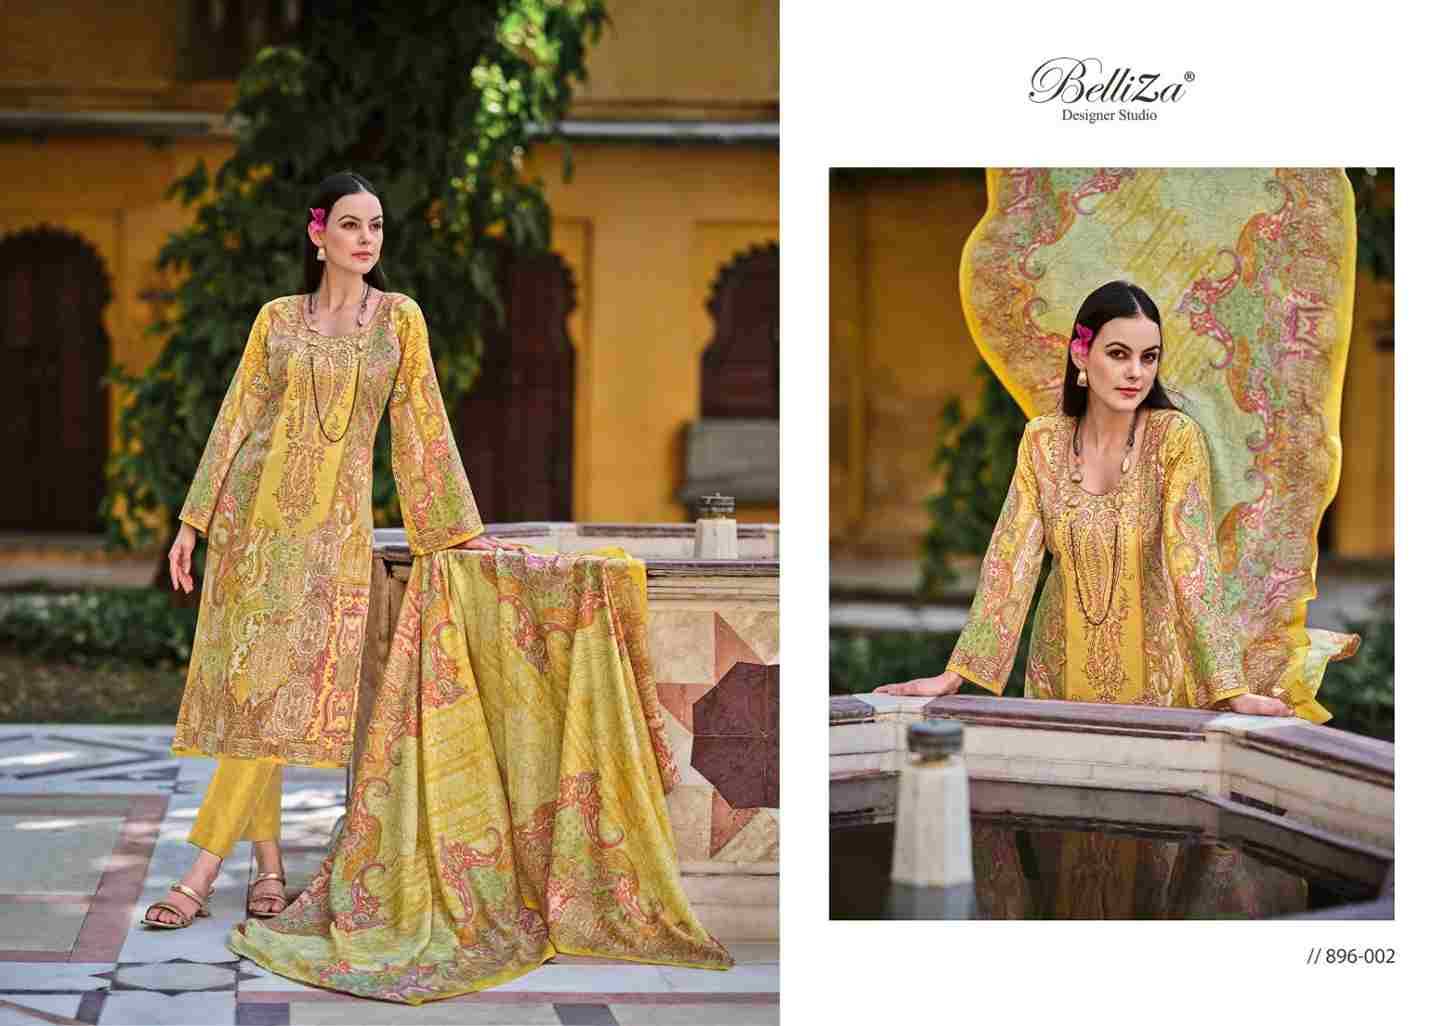 Naira Vol-43 By Belliza 896-001 To 896-008 Series Beautiful Festive Suits Stylish Fancy Colorful Casual Wear & Ethnic Wear Pure Cotton Print Dresses At Wholesale Price